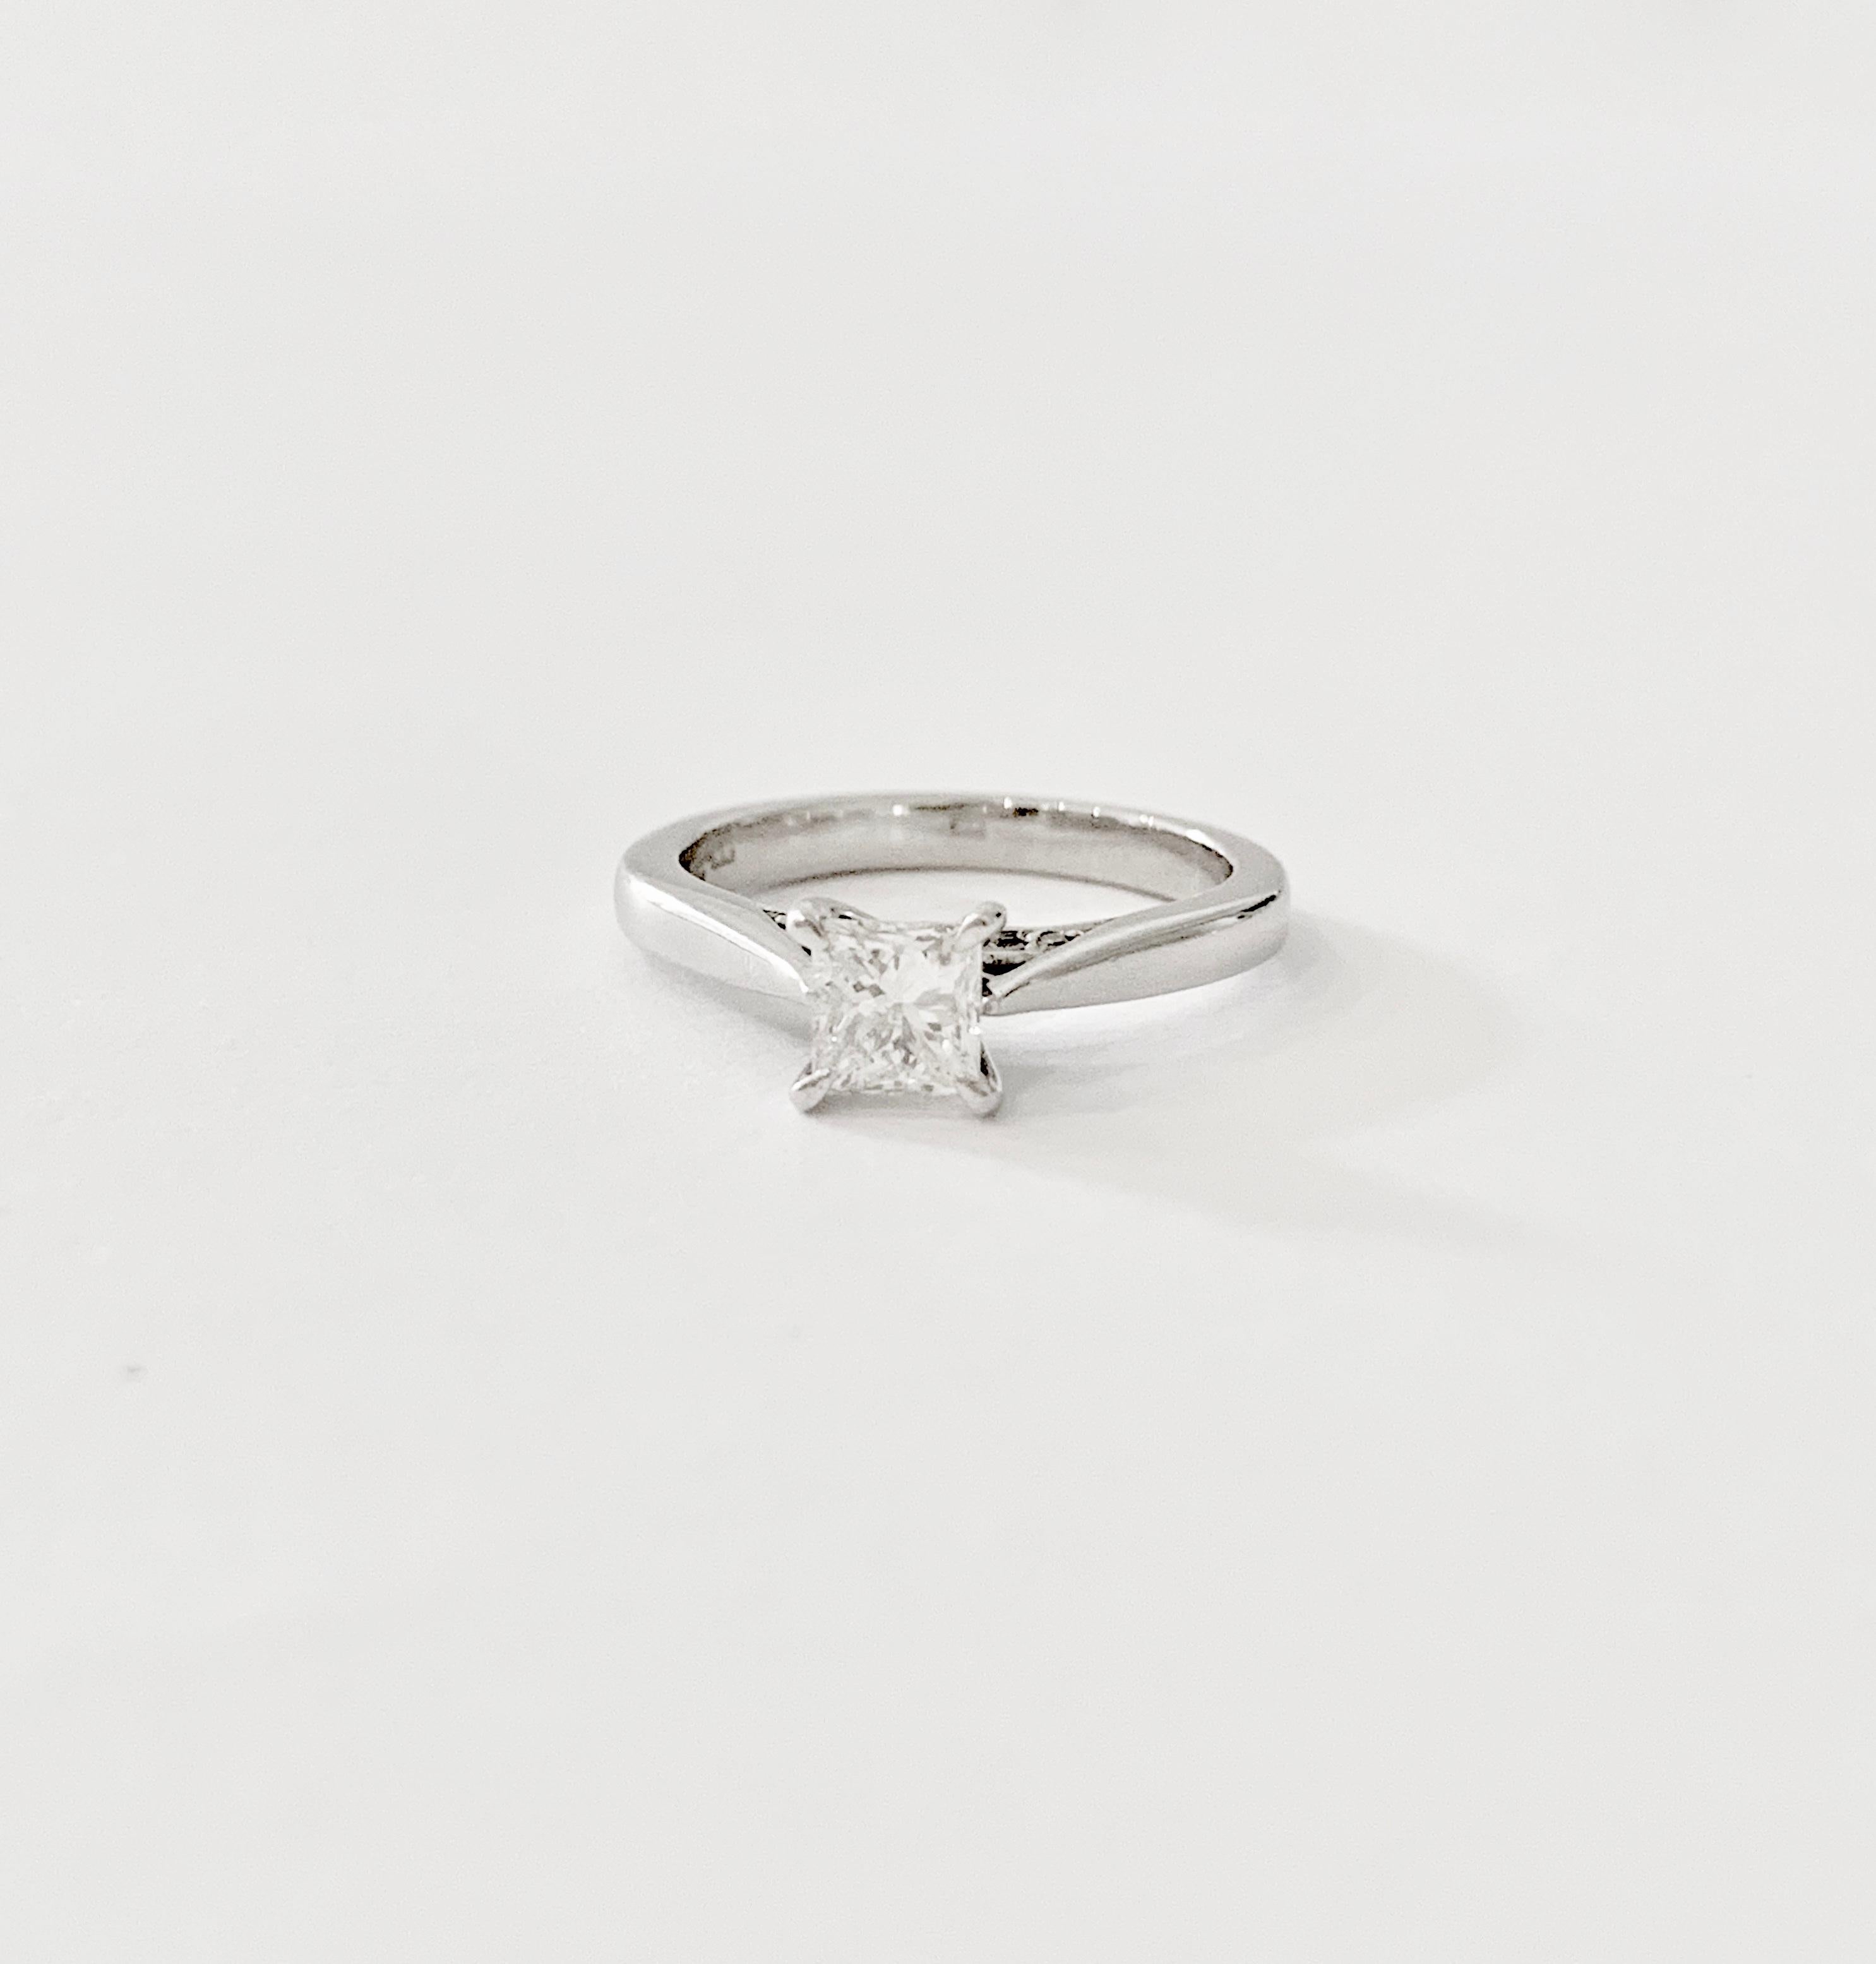 This elegant GIA 0.50ct Princess Cut diamond is claw set a Platinum band with a diamond accent on the curve of the band under the stone.  The Diamond is Certified as G colour and VS2 Clarity and measures 4.36 - 4.20 x 3.21.

The ring weight for the